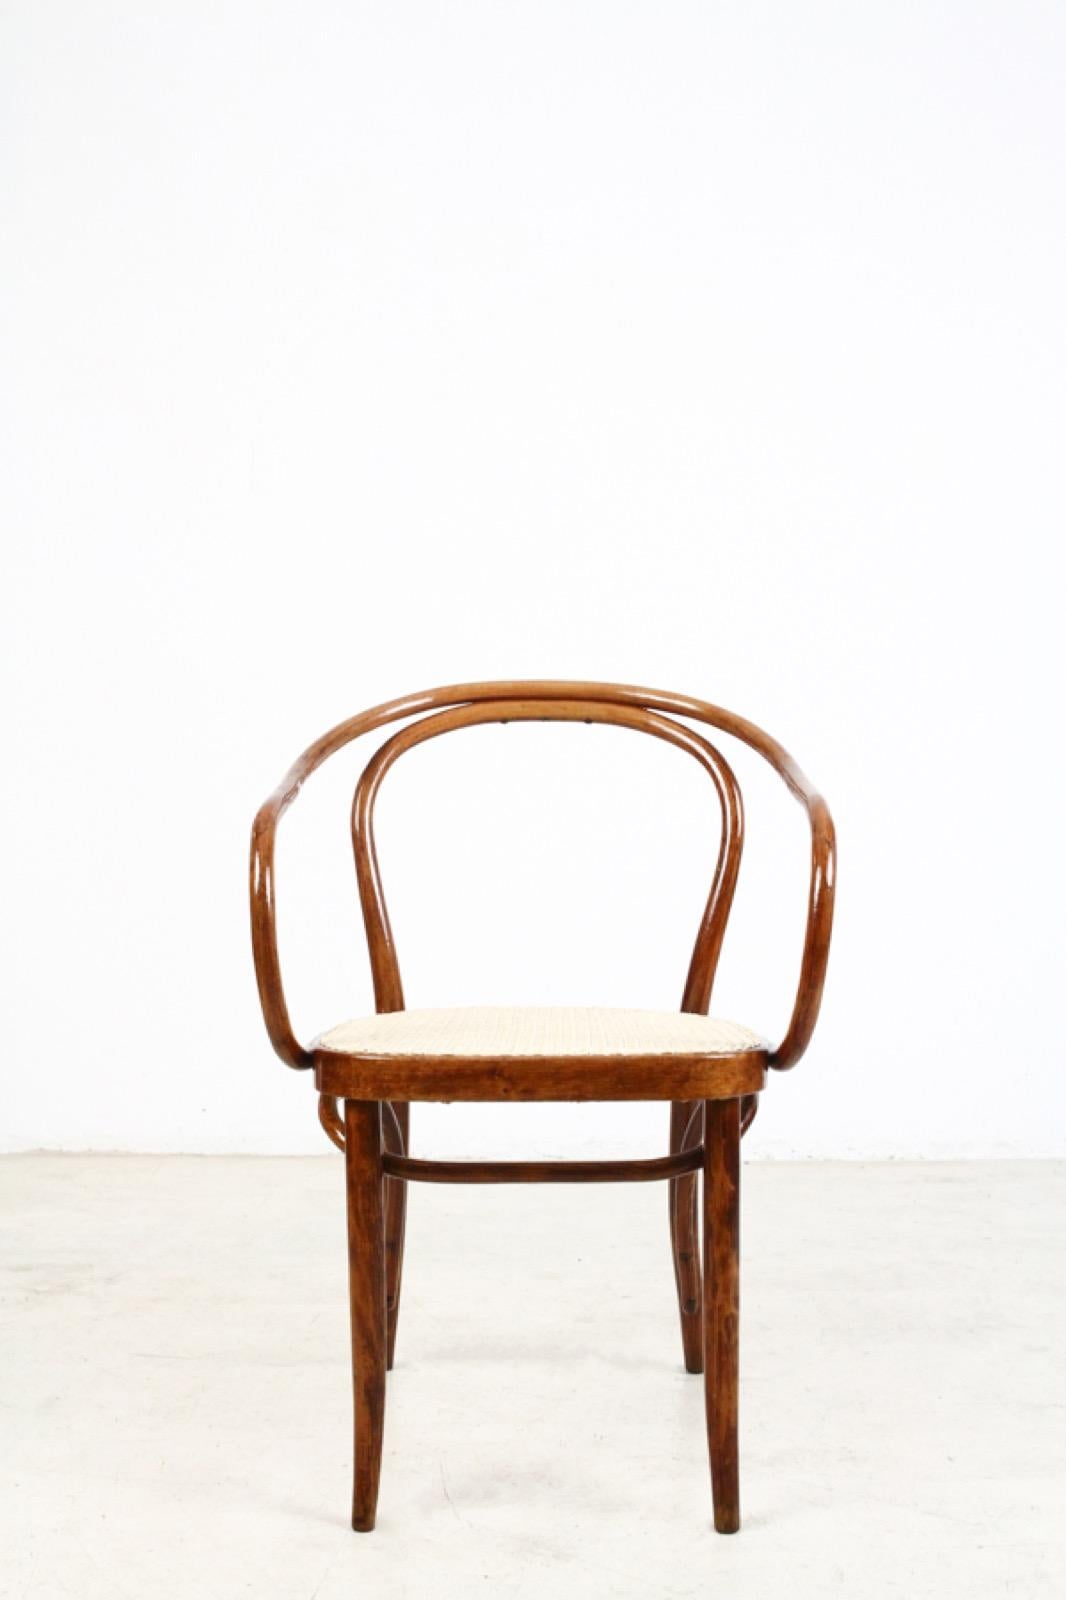 This iconic chair was designed by August Thonet in 1900 and produced by Thonet in Czechoslovakia. It features a stained beech bentwood frame and a rattan seat. Wood and rattan are in good condition and they are ready to be the highlight of your